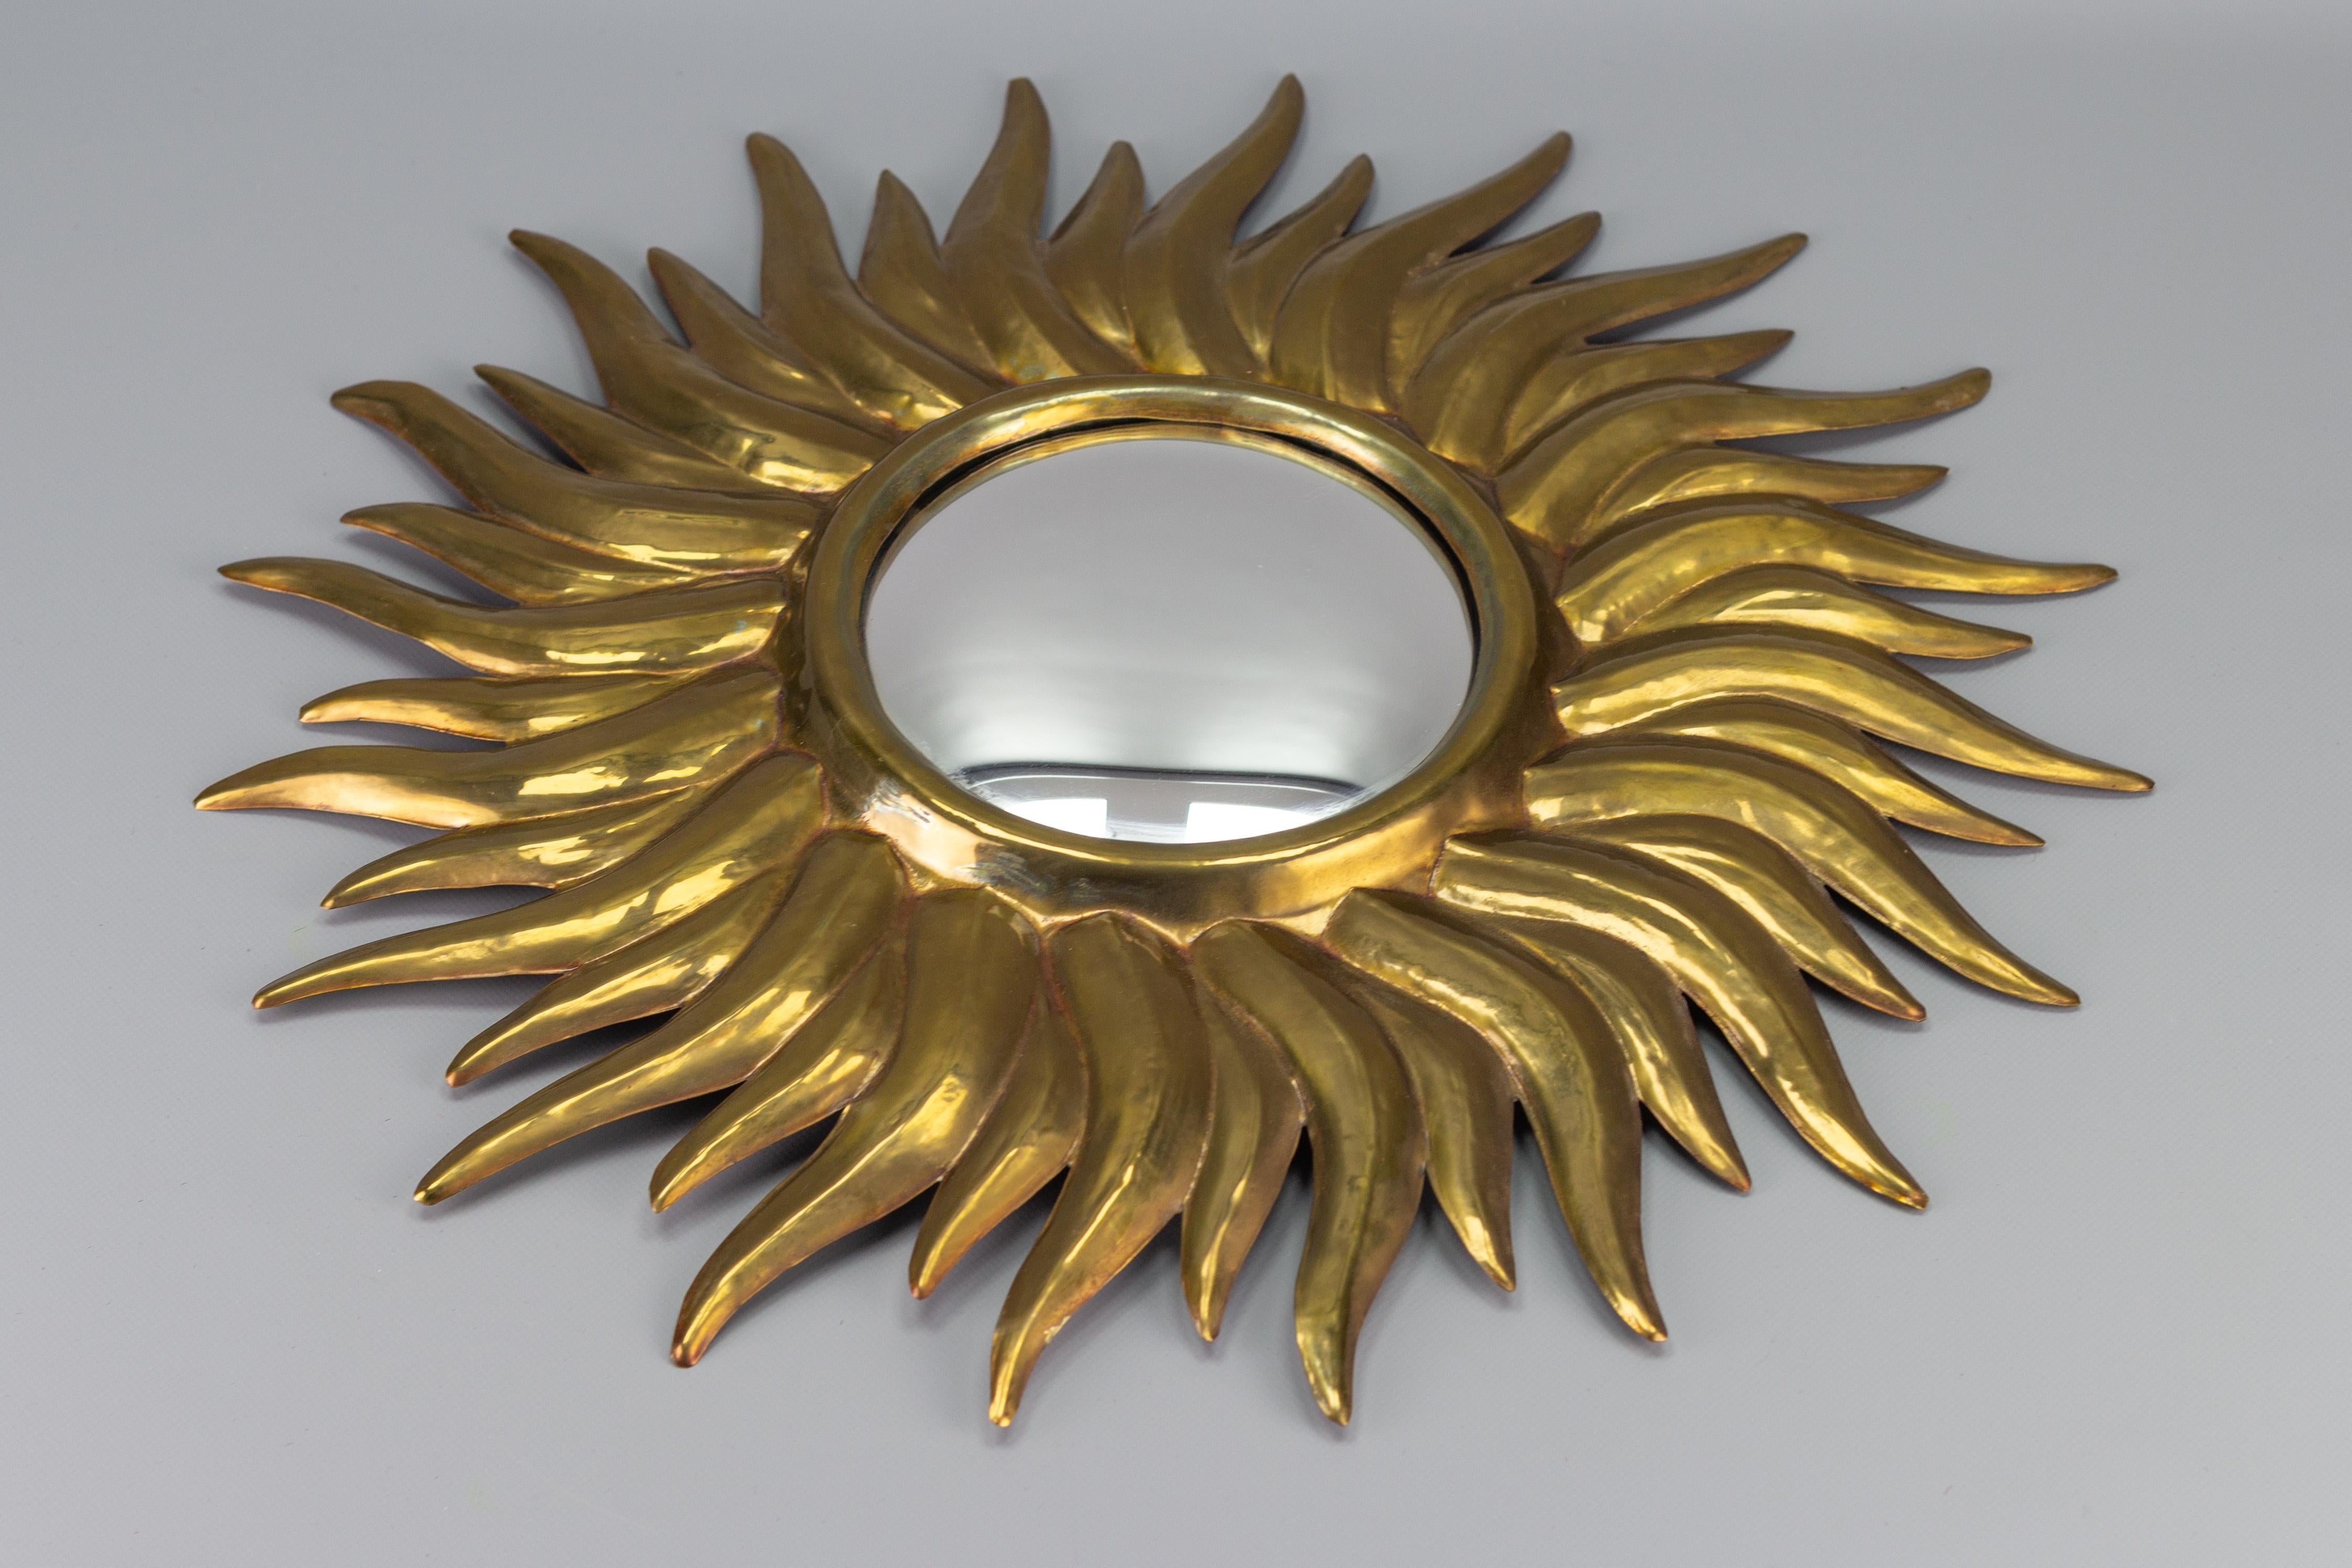 Adorable French late 19th-century golden wall mirror in the shape of the sun with convex mirror glass. The convex mirror gives a full view of the room and was originally made to watch servants.
Dimensions: 
diameter of the sun: 54 cm / 21.26 in;